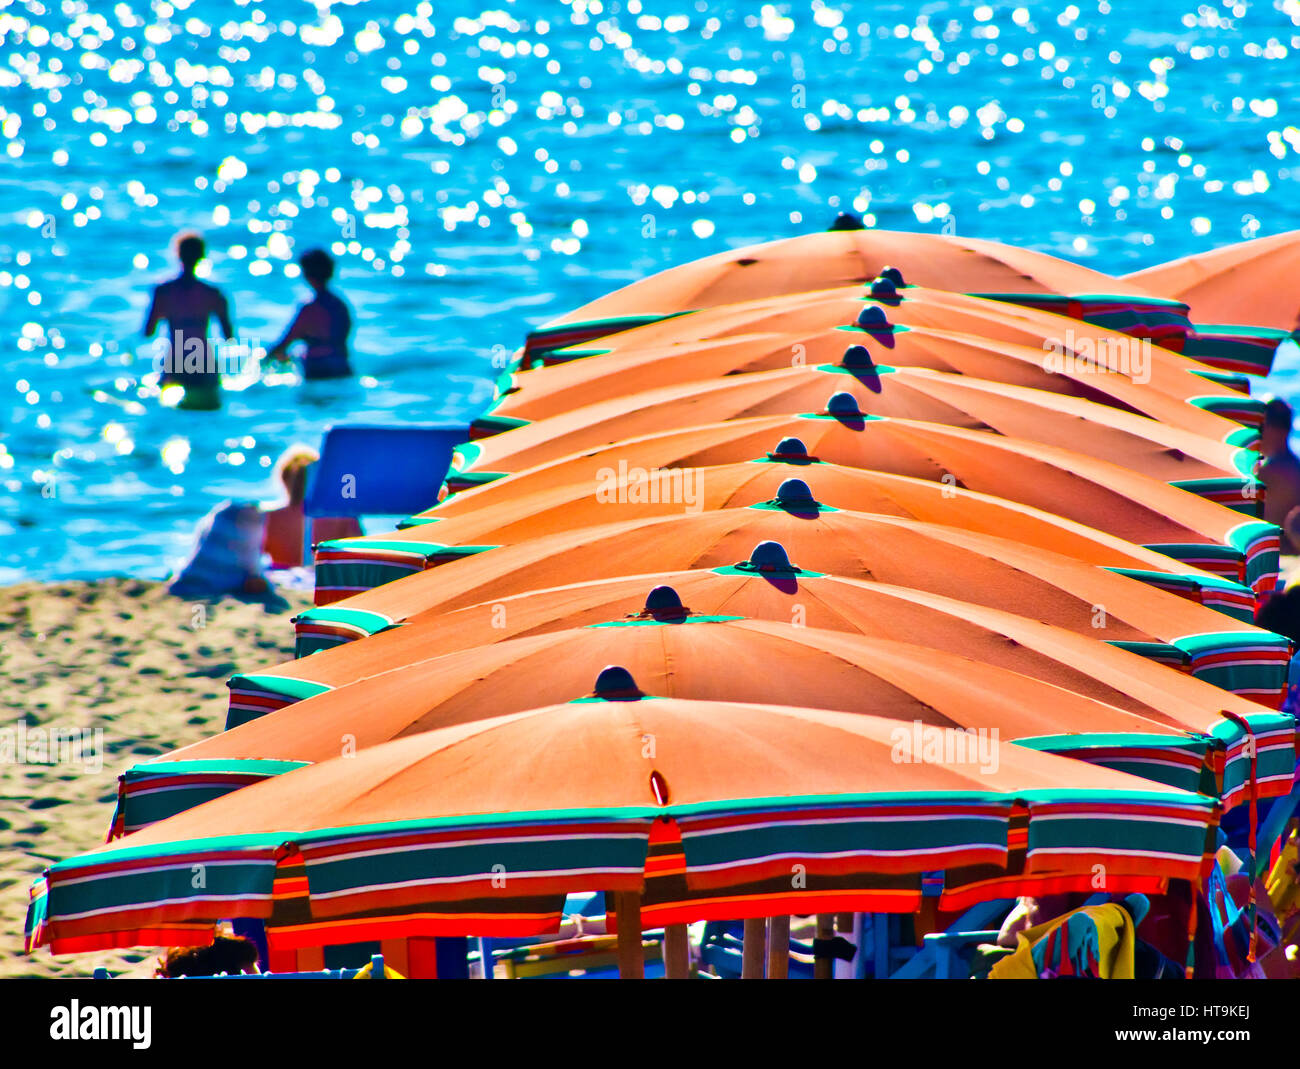 bathers on vacation on the sea background with orange umbrellas in summer with blue sky Stock Photo